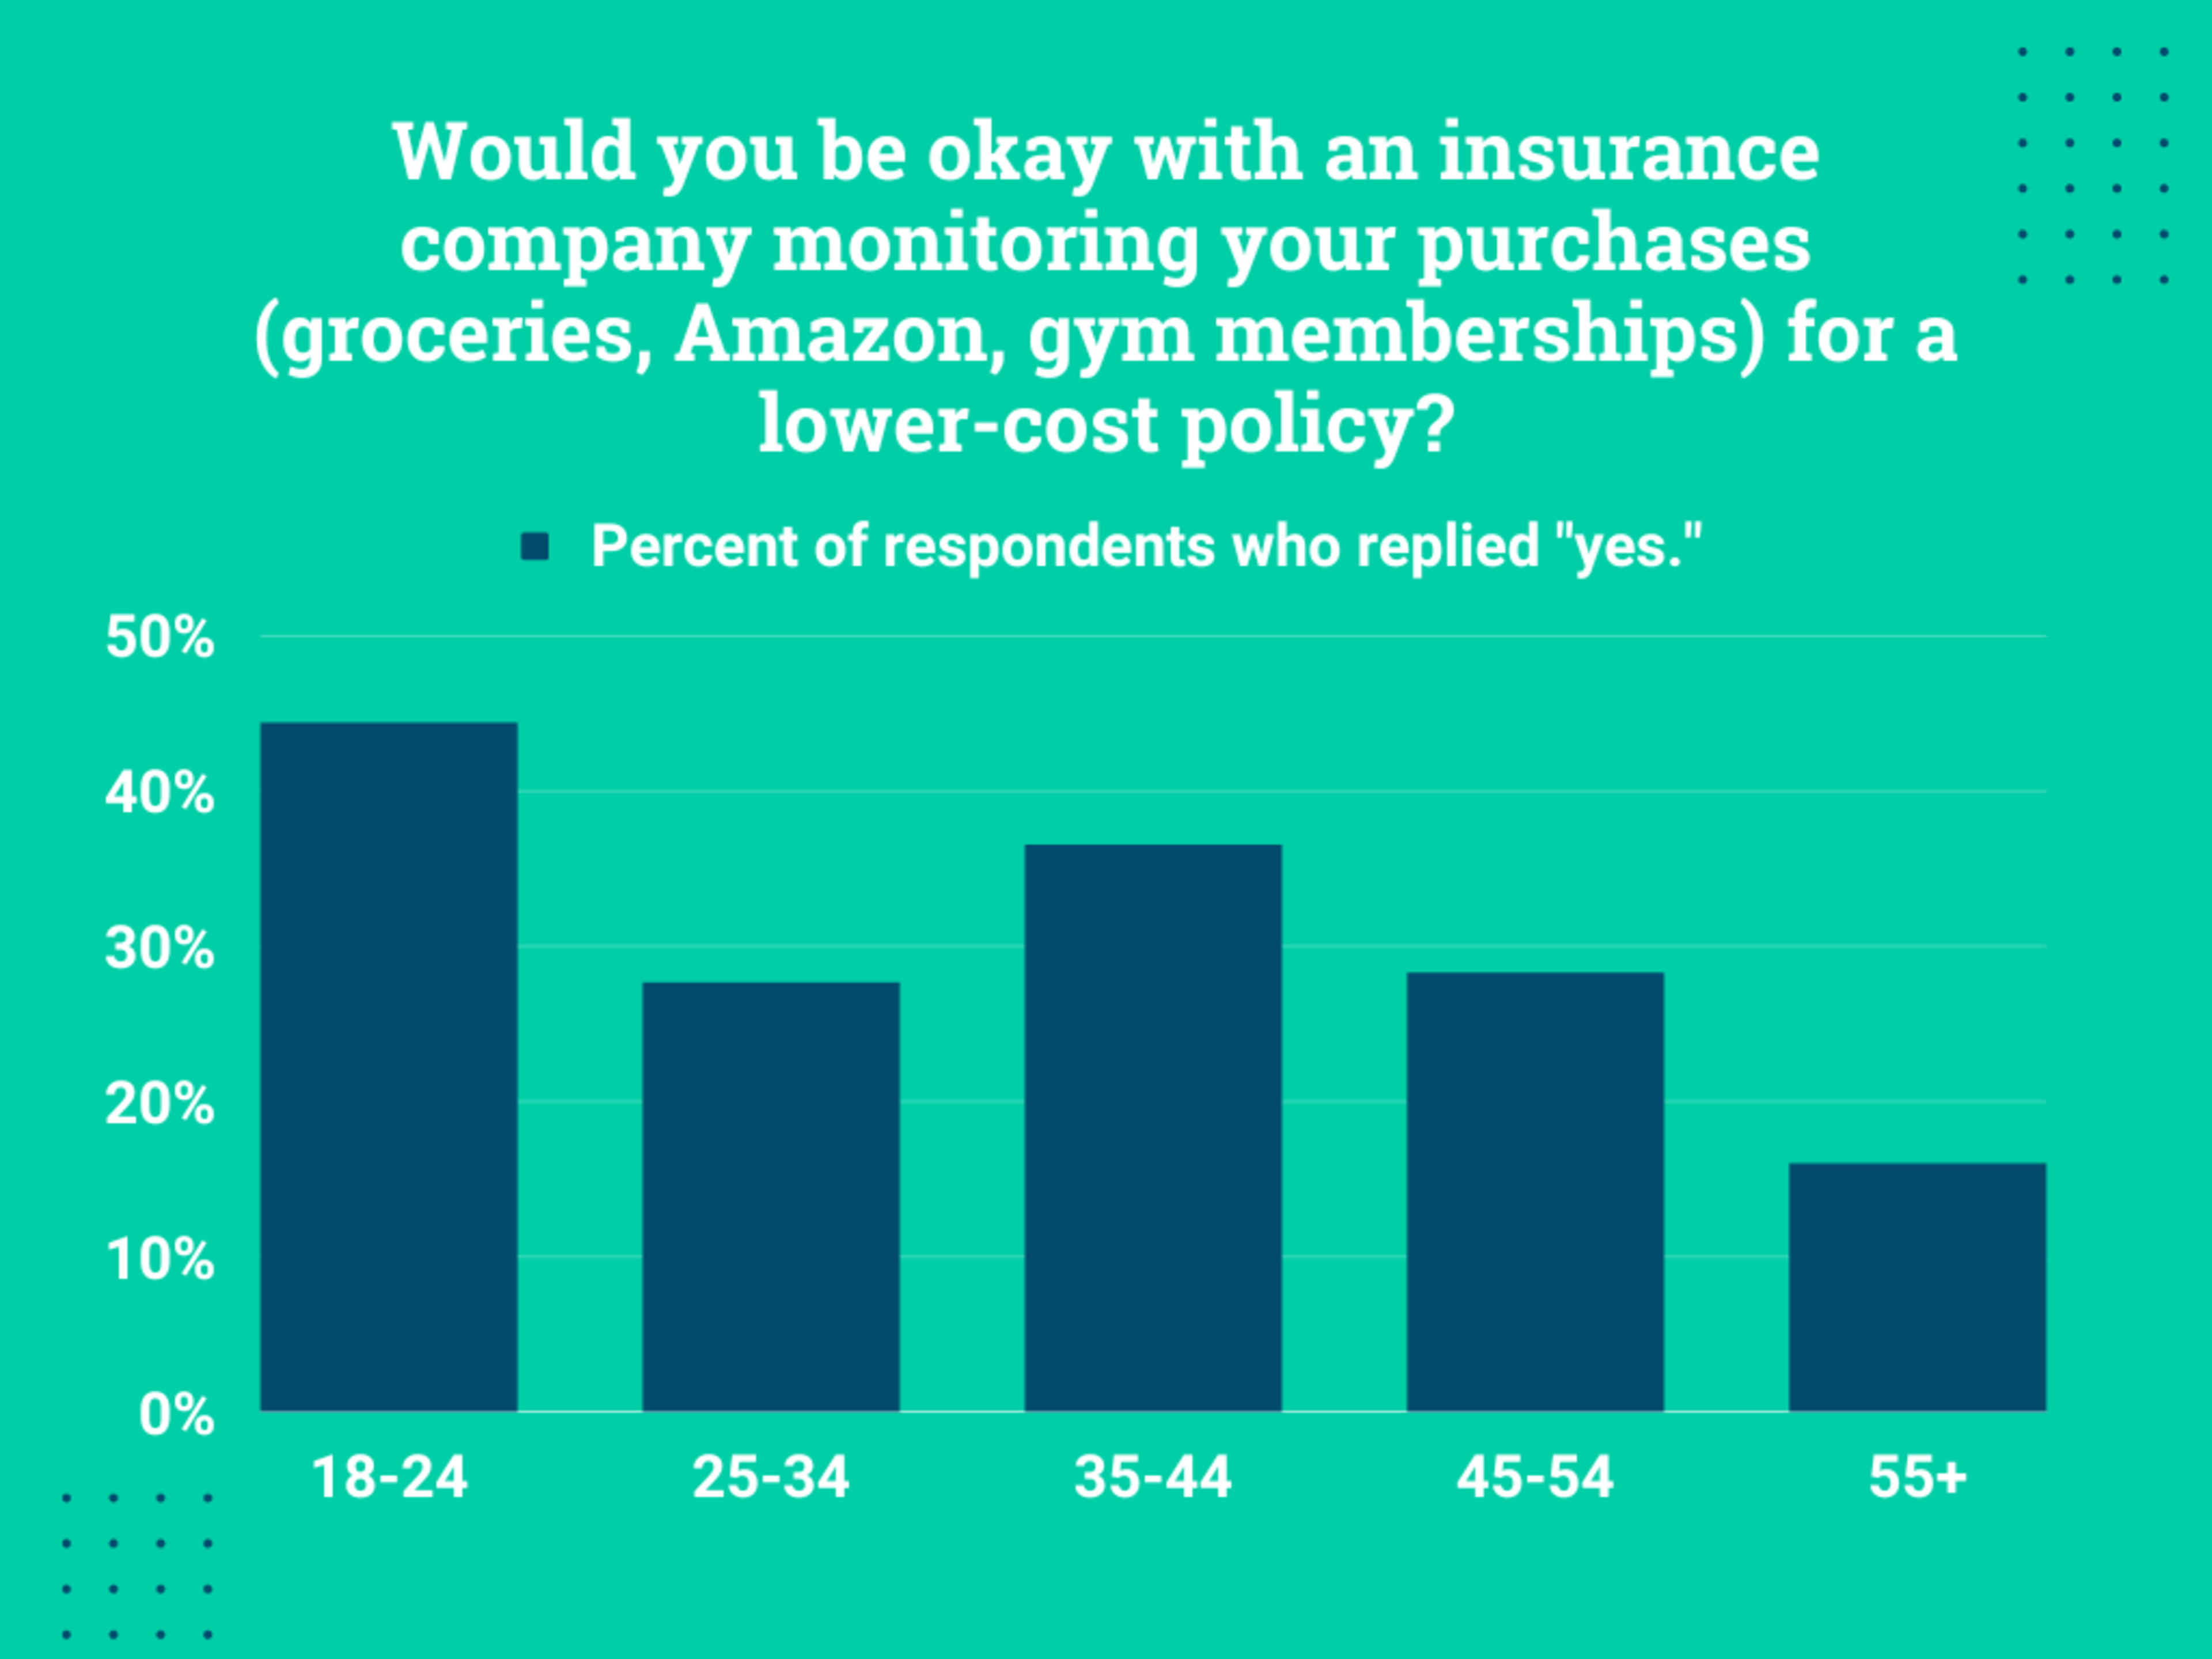 Would you be okay with an insurance company monitoring your purchases (groceries, Amazon, gym memberships) for a lower-cost policy?